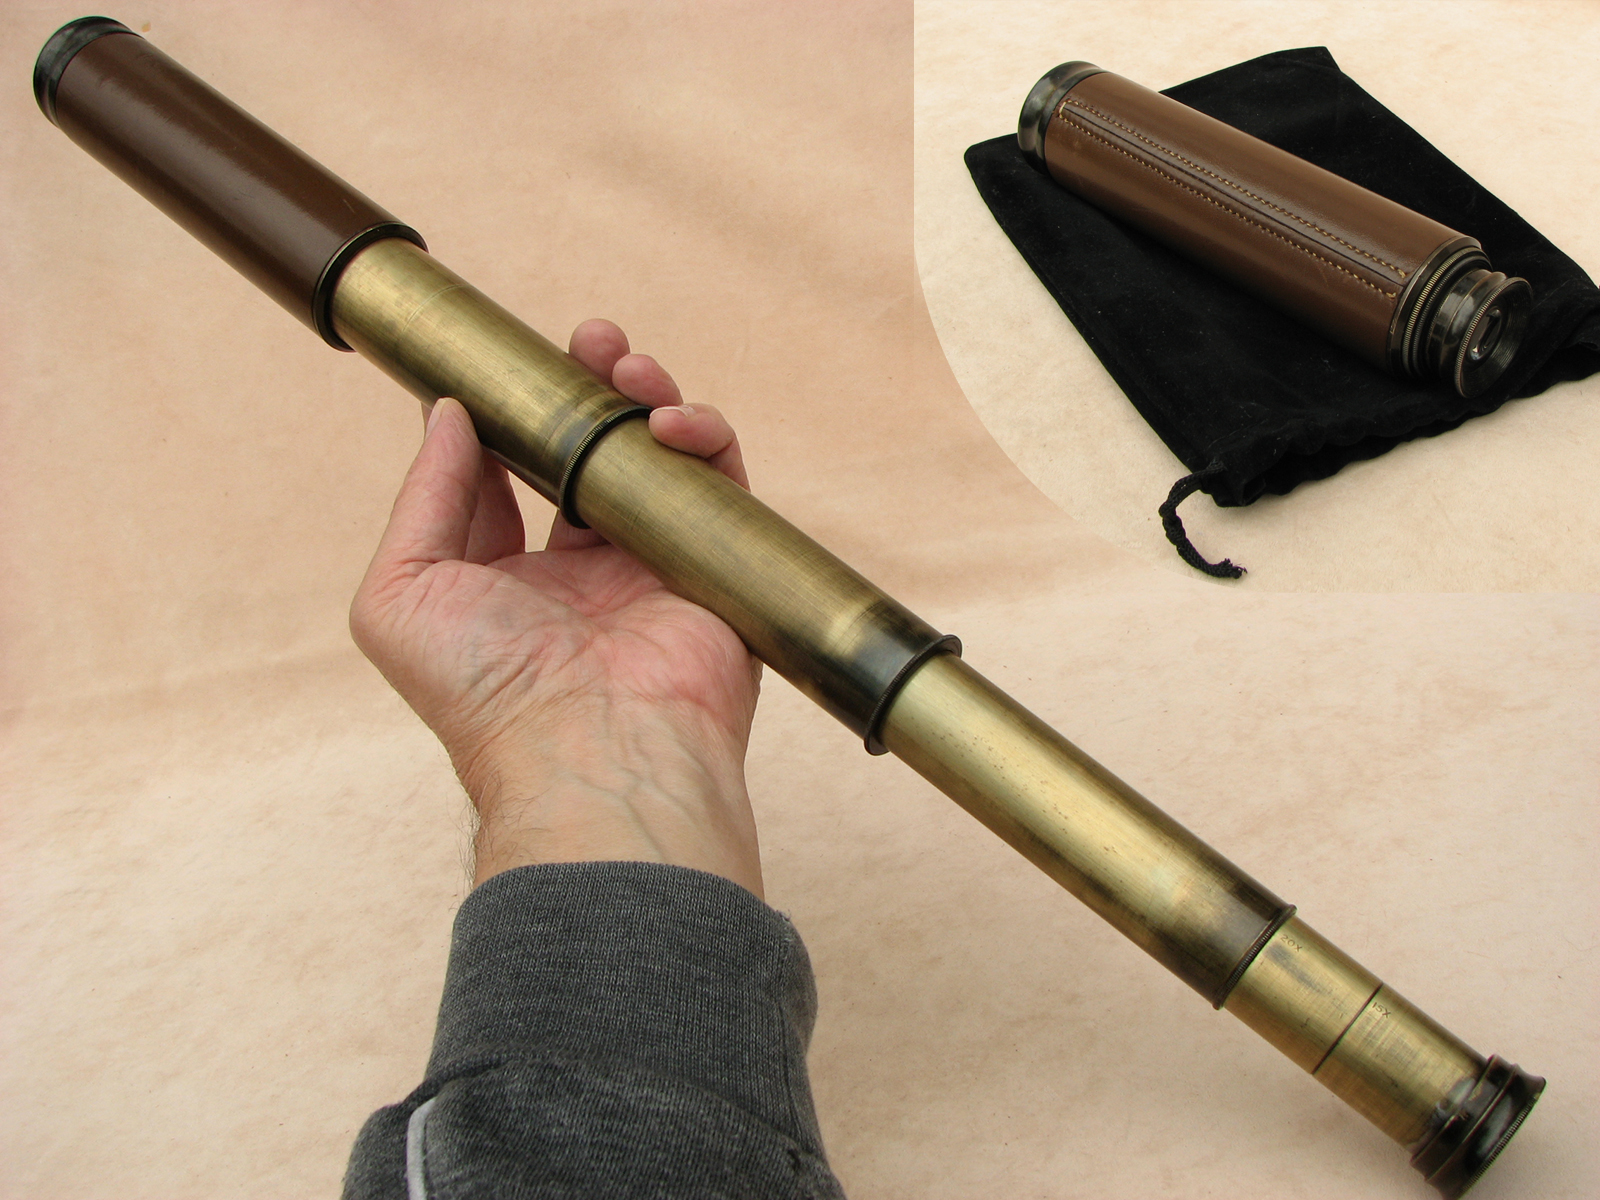 3 draw leather clad pocket telescope with pancratic tube to 20x magnification.